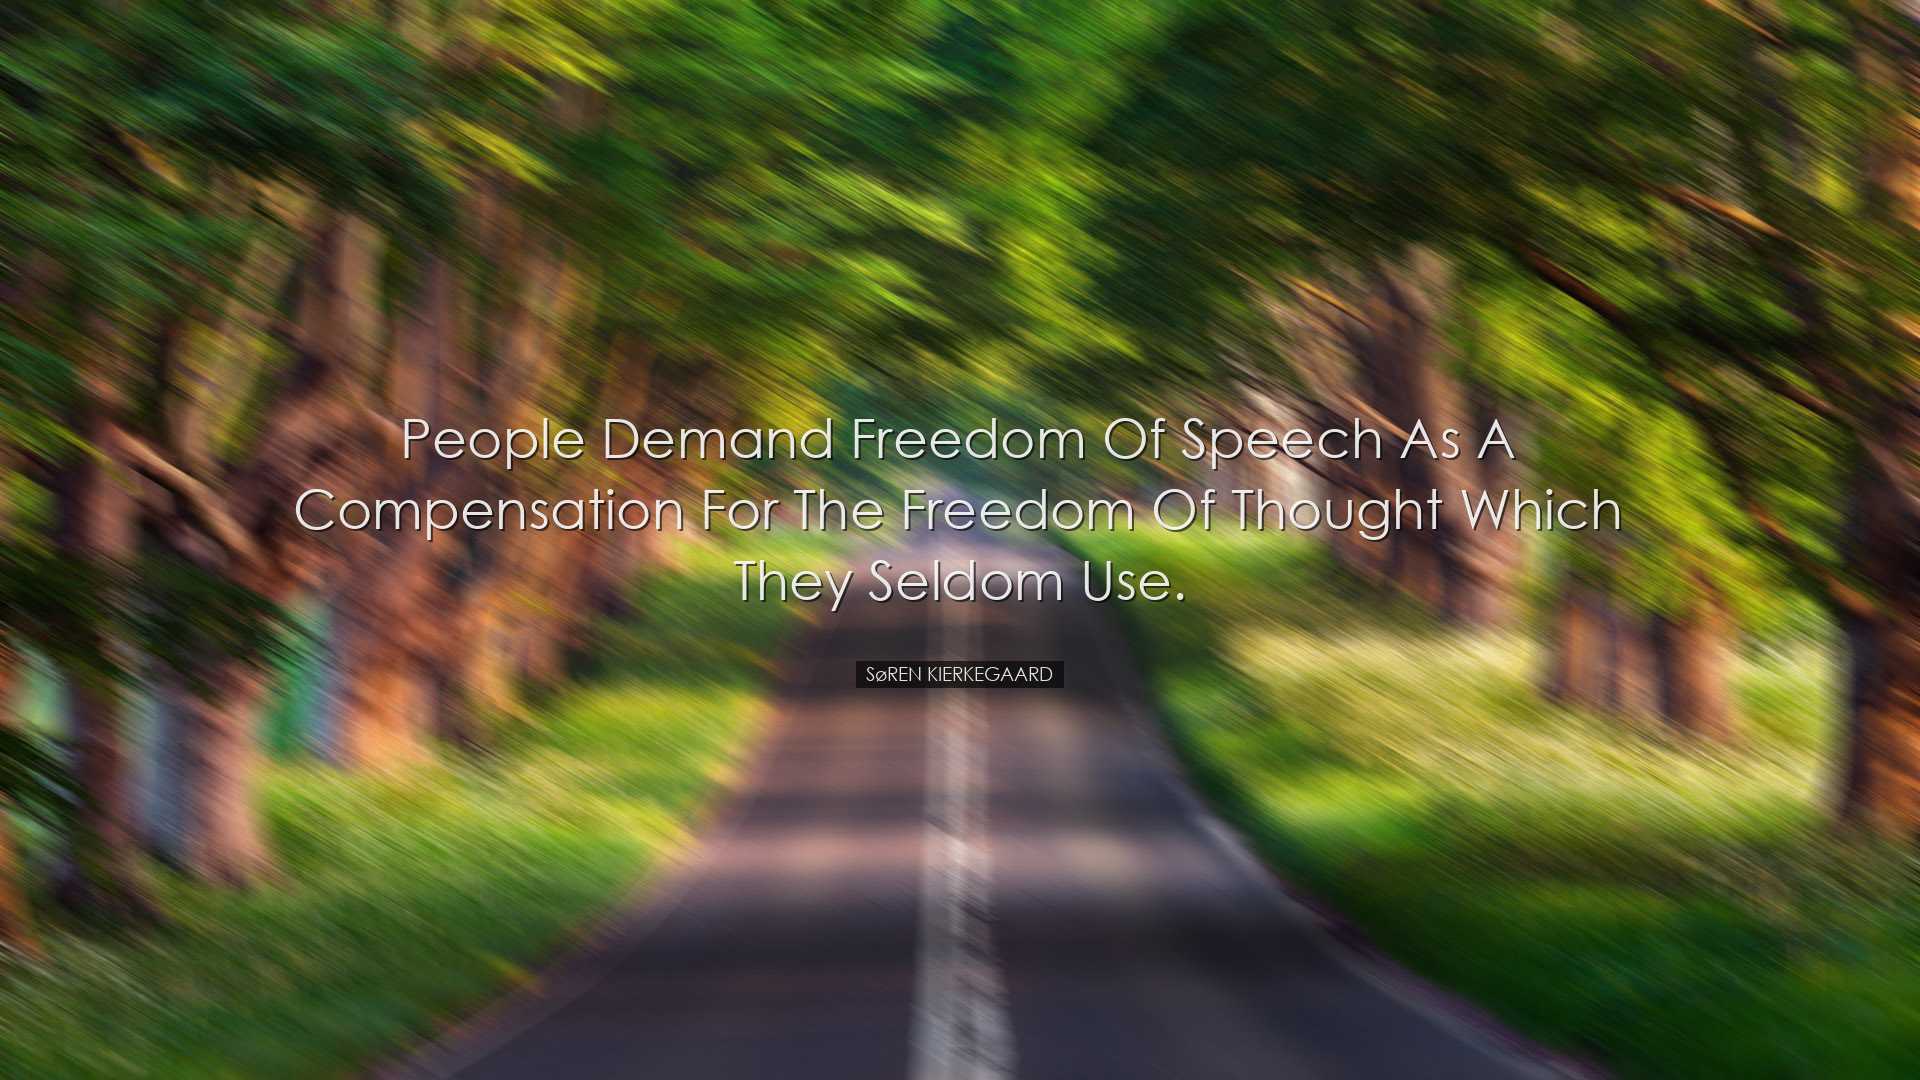 People demand freedom of speech as a compensation for the freedom